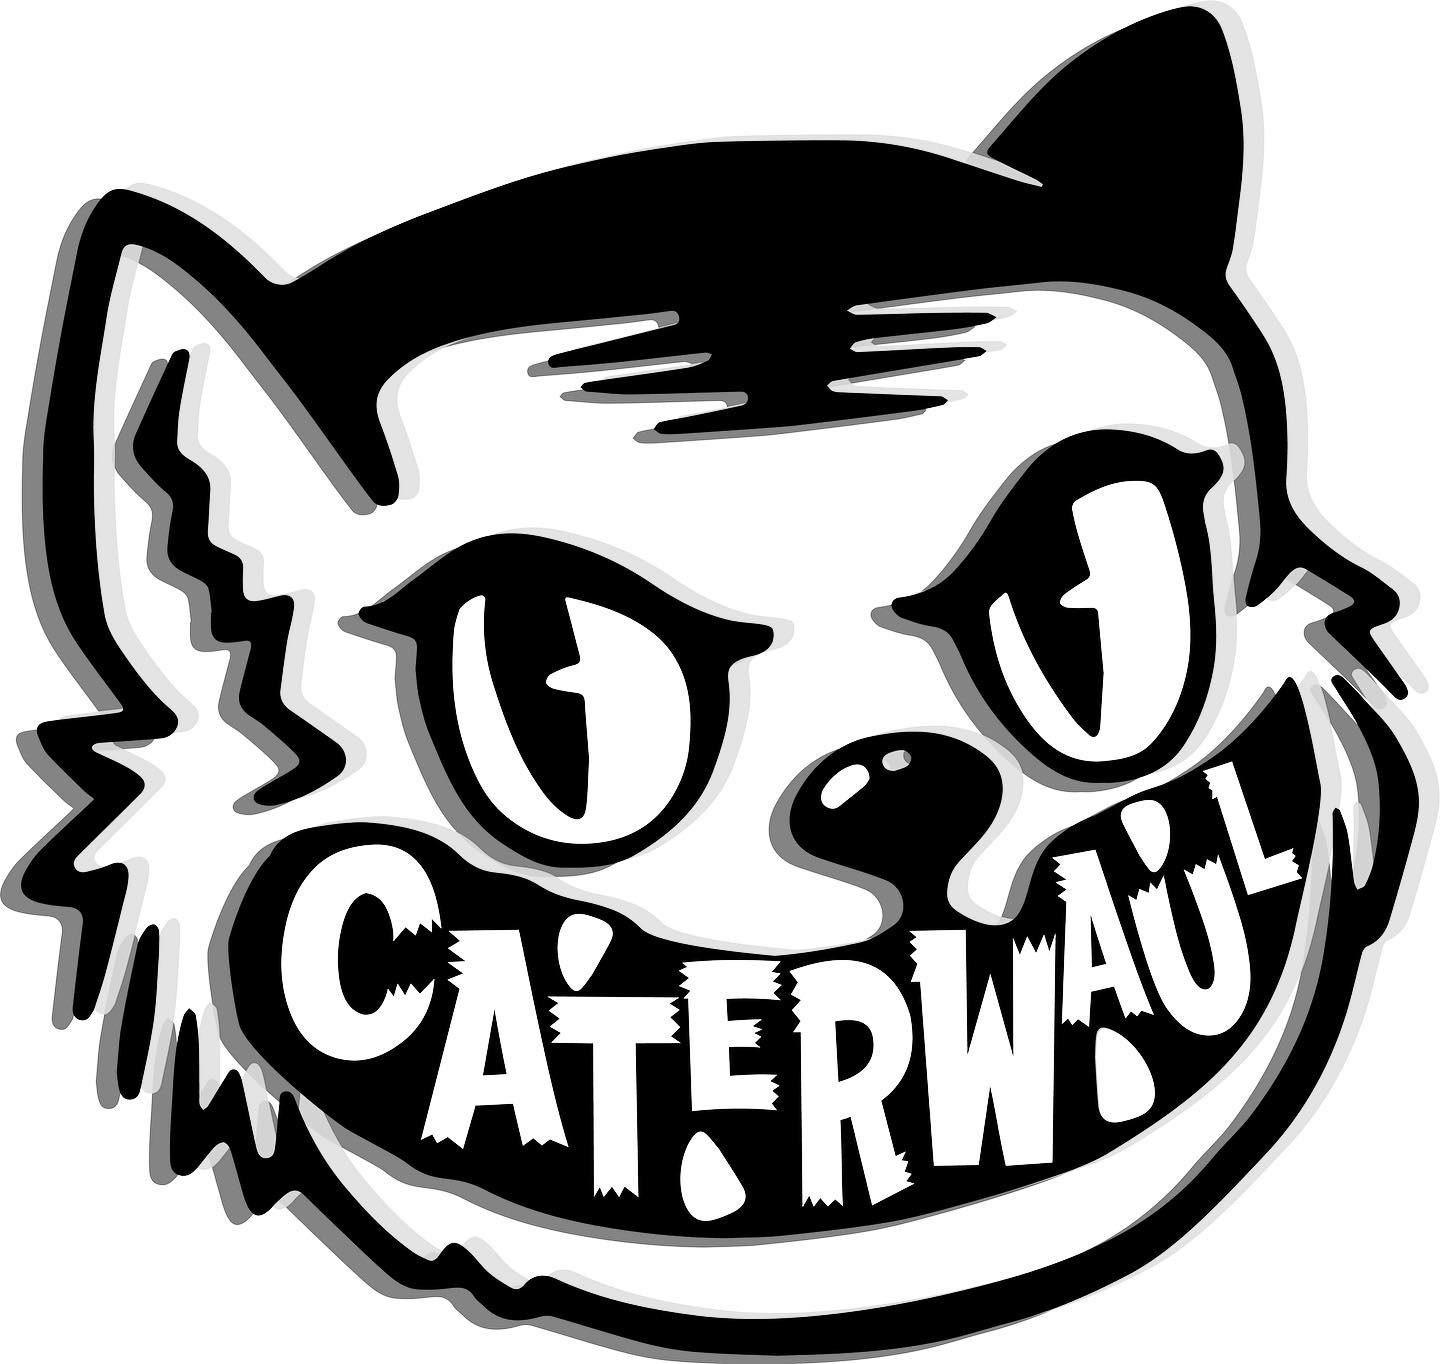 With the 2024 incarnation of @caterwaulfest just one month away, the fest organizers have released the final updated lineup and schedule for the event.

Scheduled for May 24-27 at Minneapolis institutions @palmersbar and @mortimersbar, this year's Ca